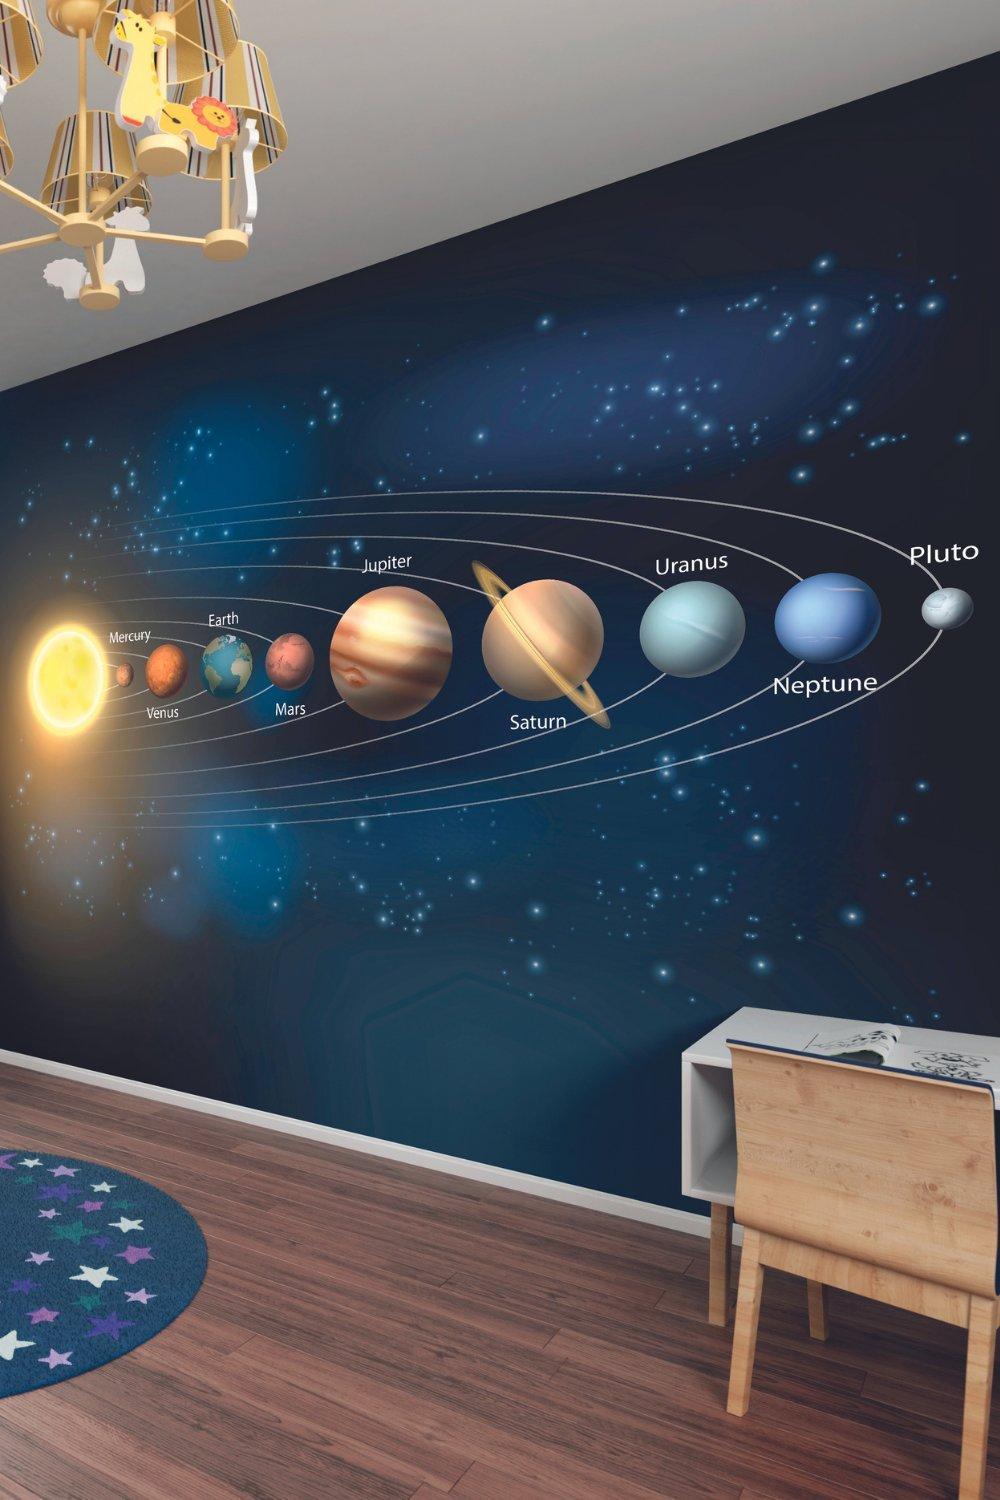 Planets Matt Smooth Paste the Wall Mural 350cm wide x 280cm high